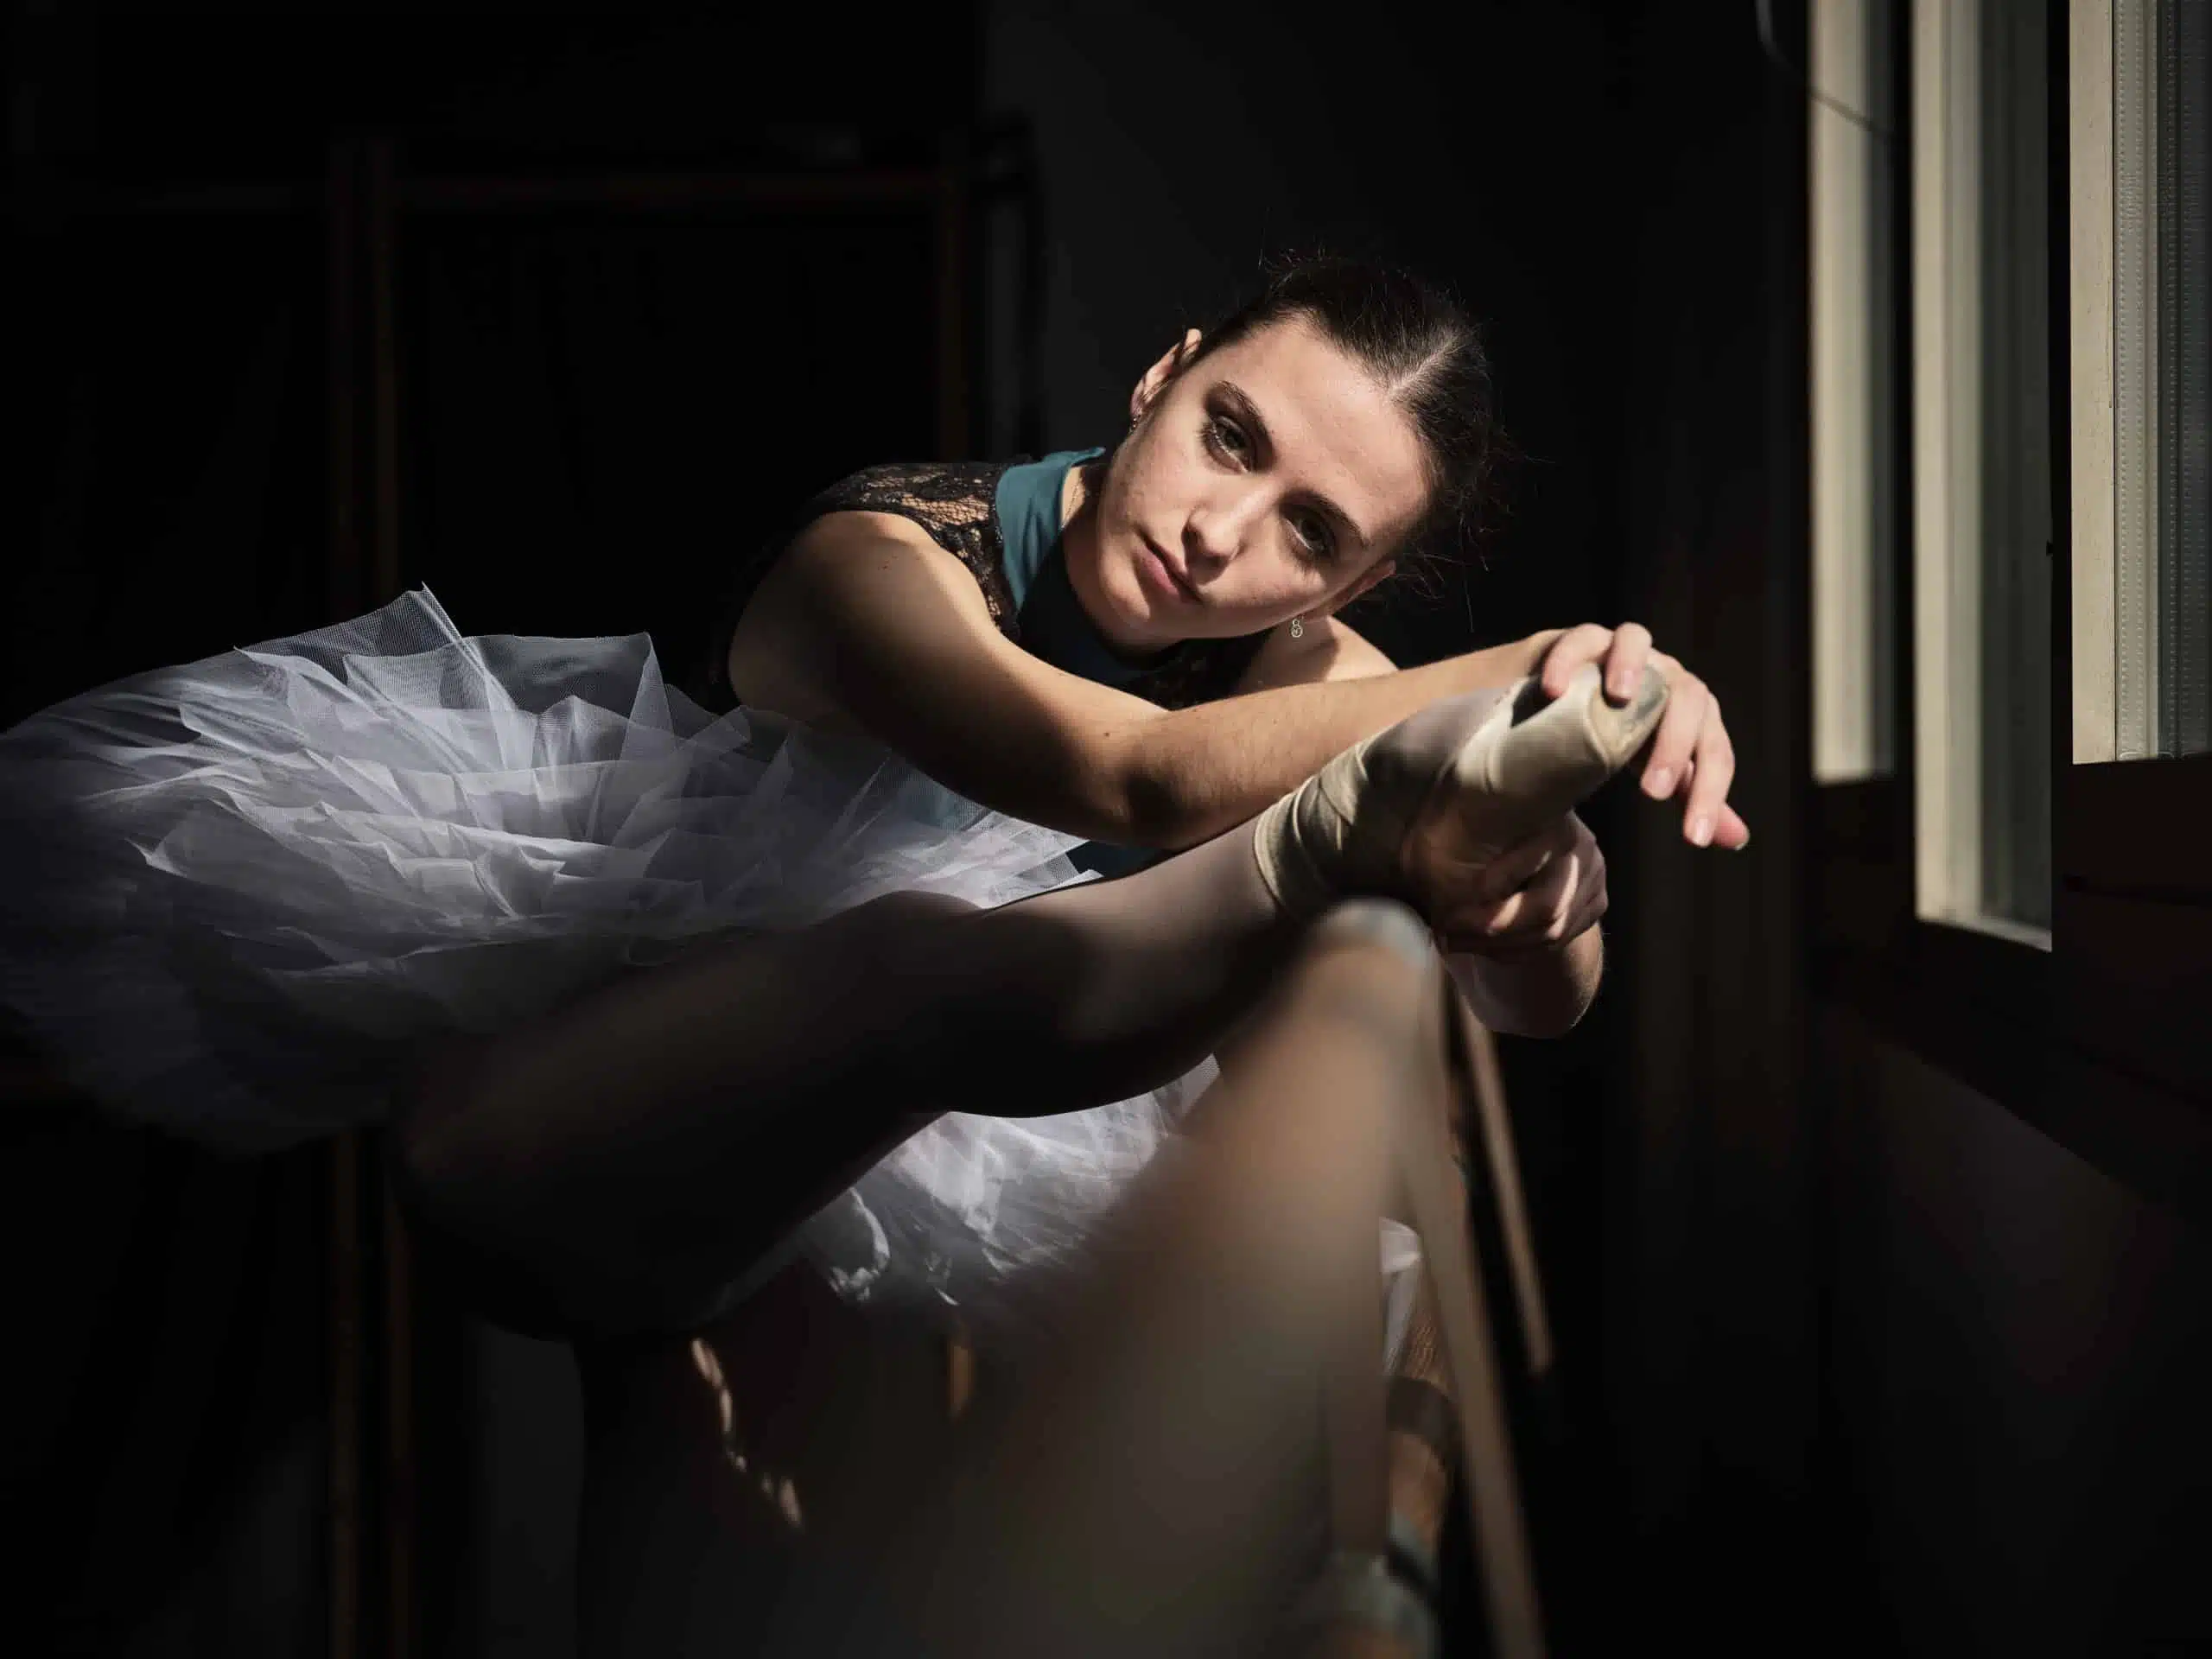 Young ballerina stretching leg on barre.